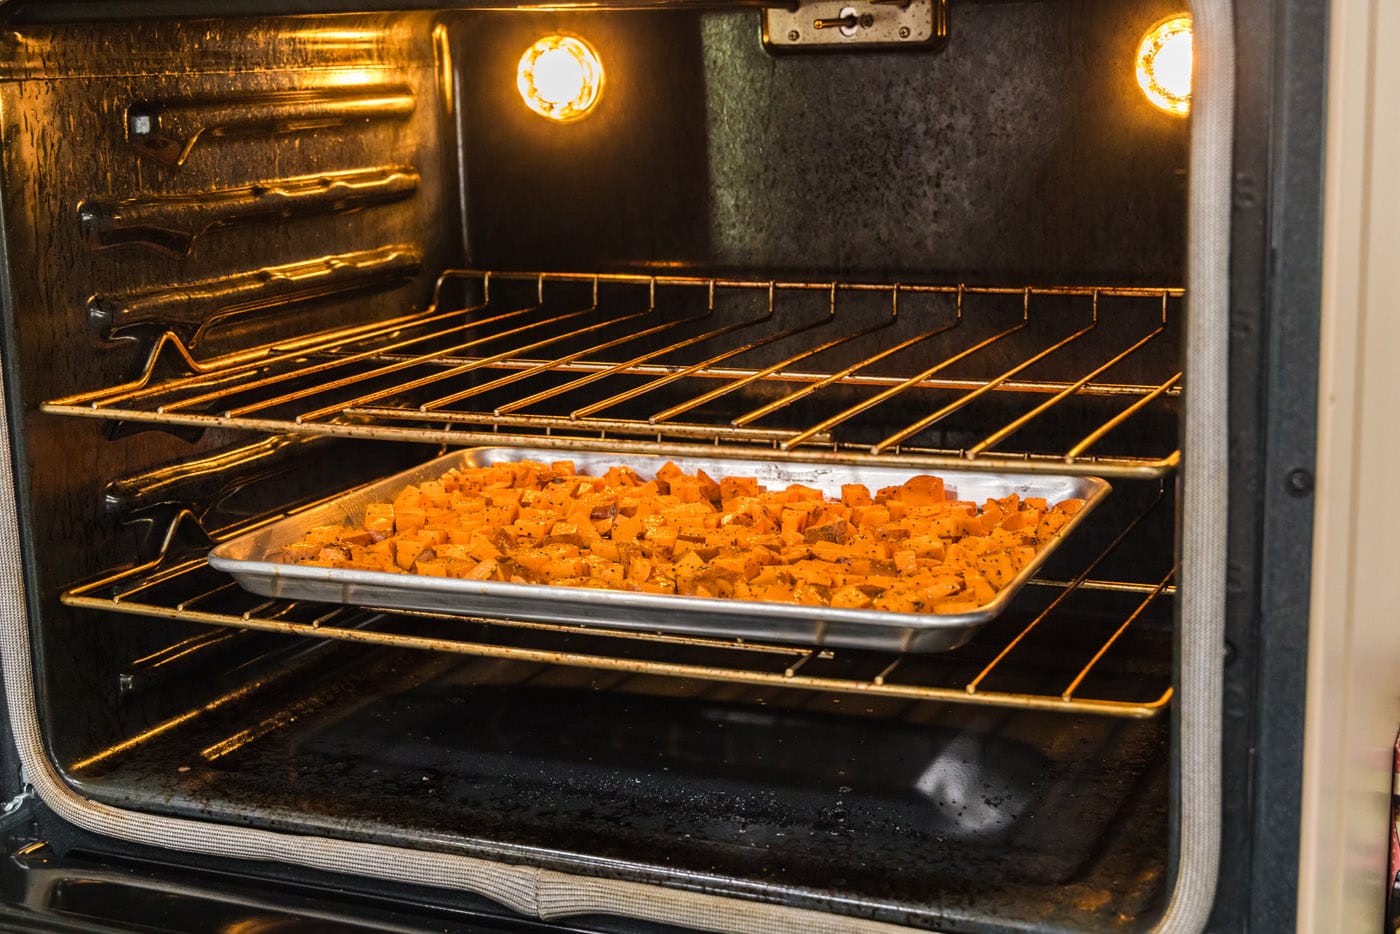 baking sweet potatoes in the oven